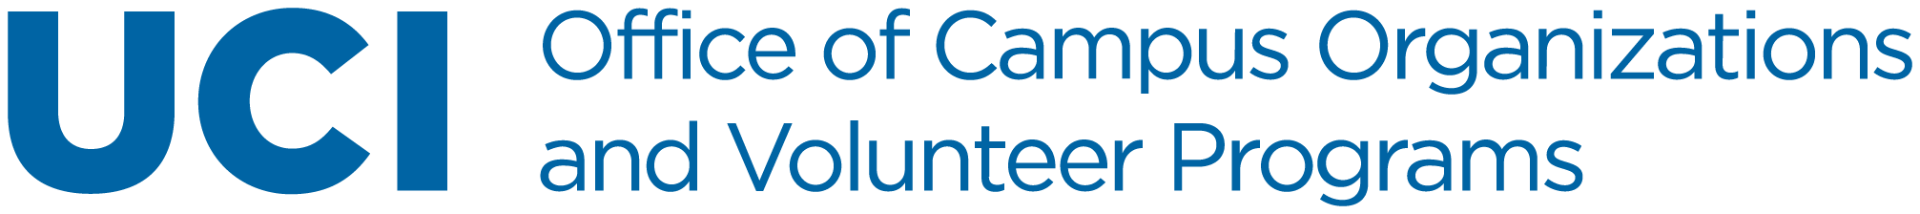 UCI Office of Campus Organizations and Volunteer Programs